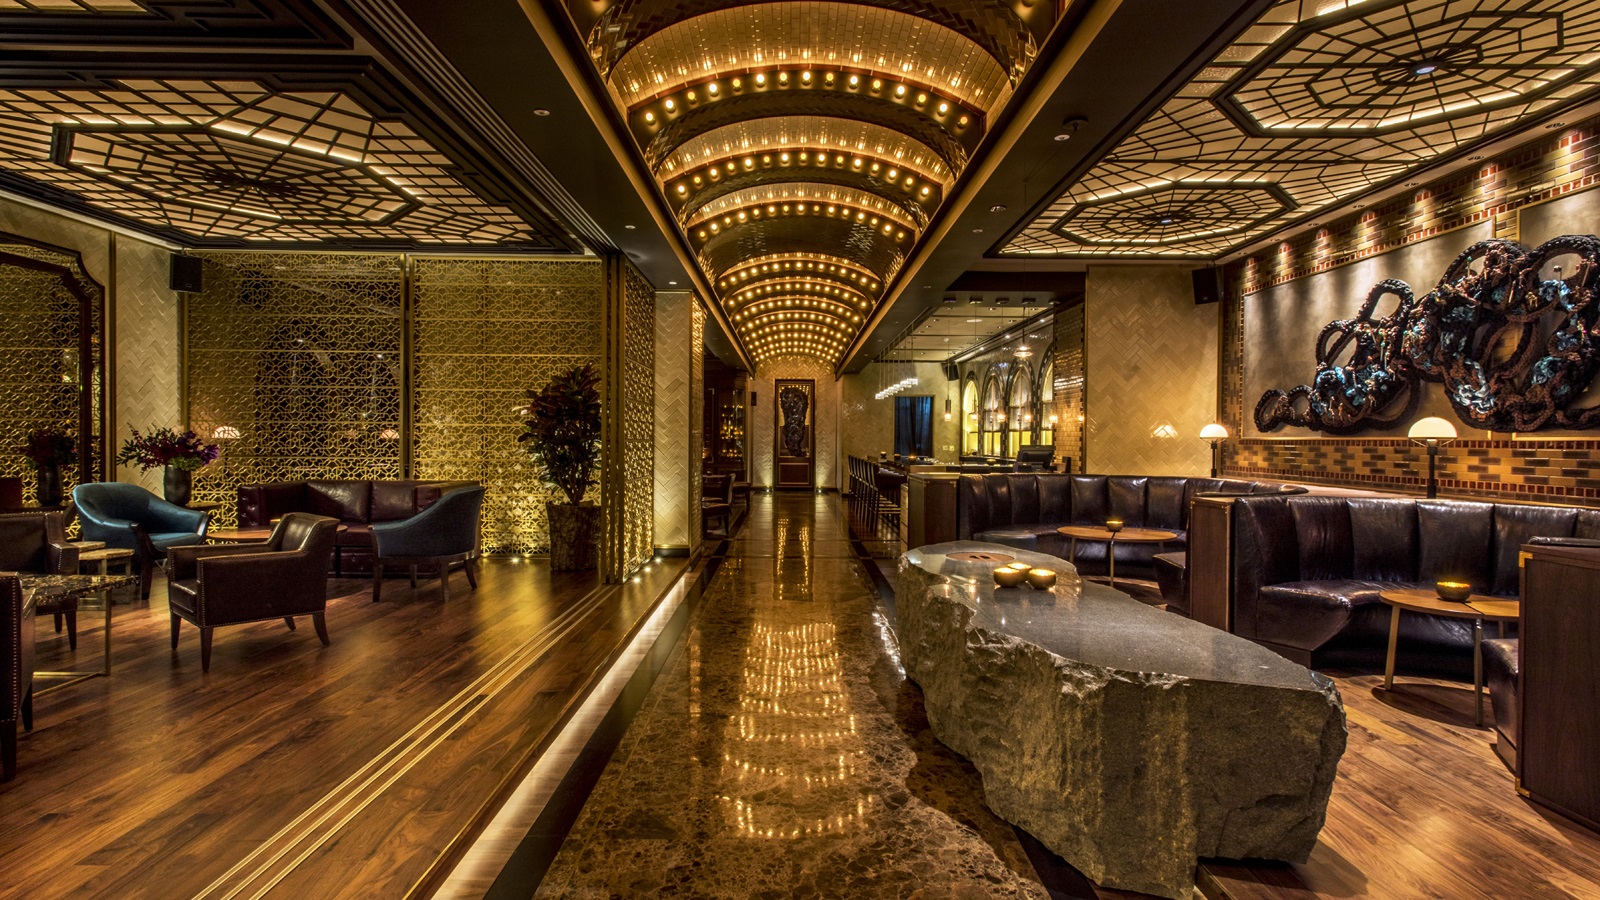 Charles H., the hidden bar at the Four Seasons Hotel Seoul, has been named as the Best Bar in Korea for the third year in a row. The bar, which has the deliciously sultry vibe of Prohibition-era speakeasies, was also named #13 Best Bar in Asia, its highest ever ranking. Click to enlarge.